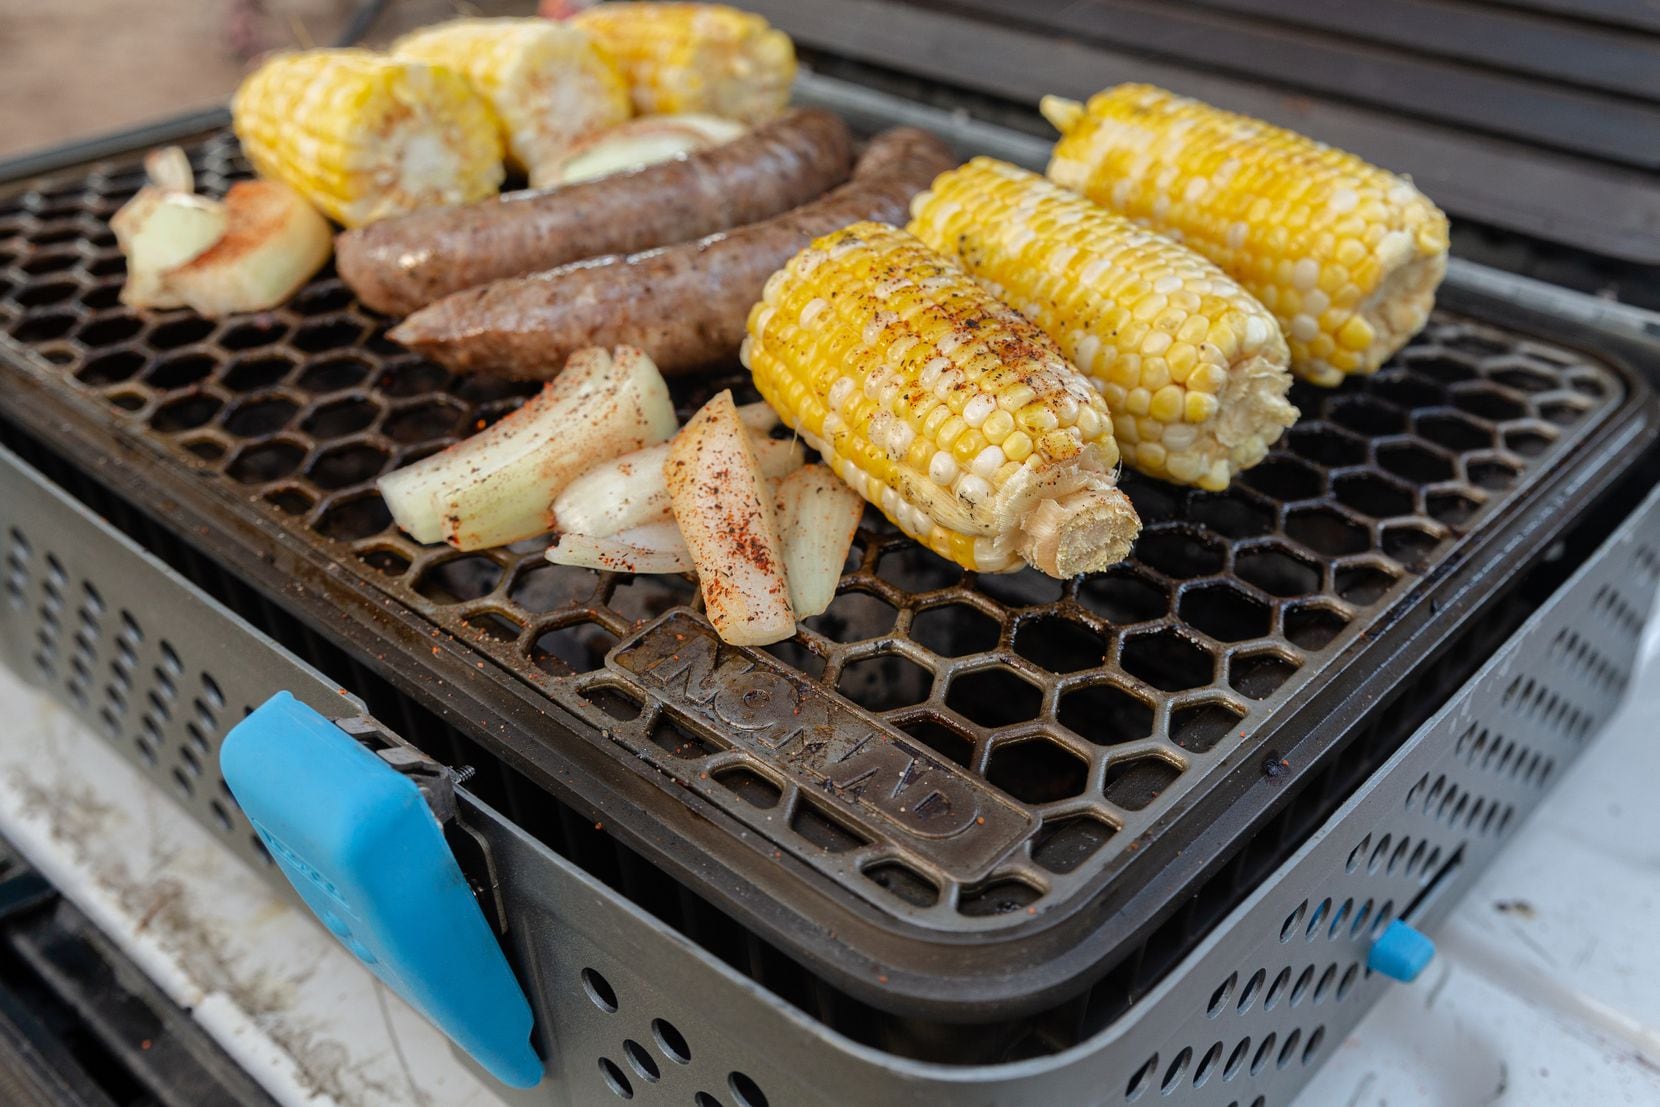 Nomad Grills is a portable charcoal grill and smoker from Dallas entrepreneurs.